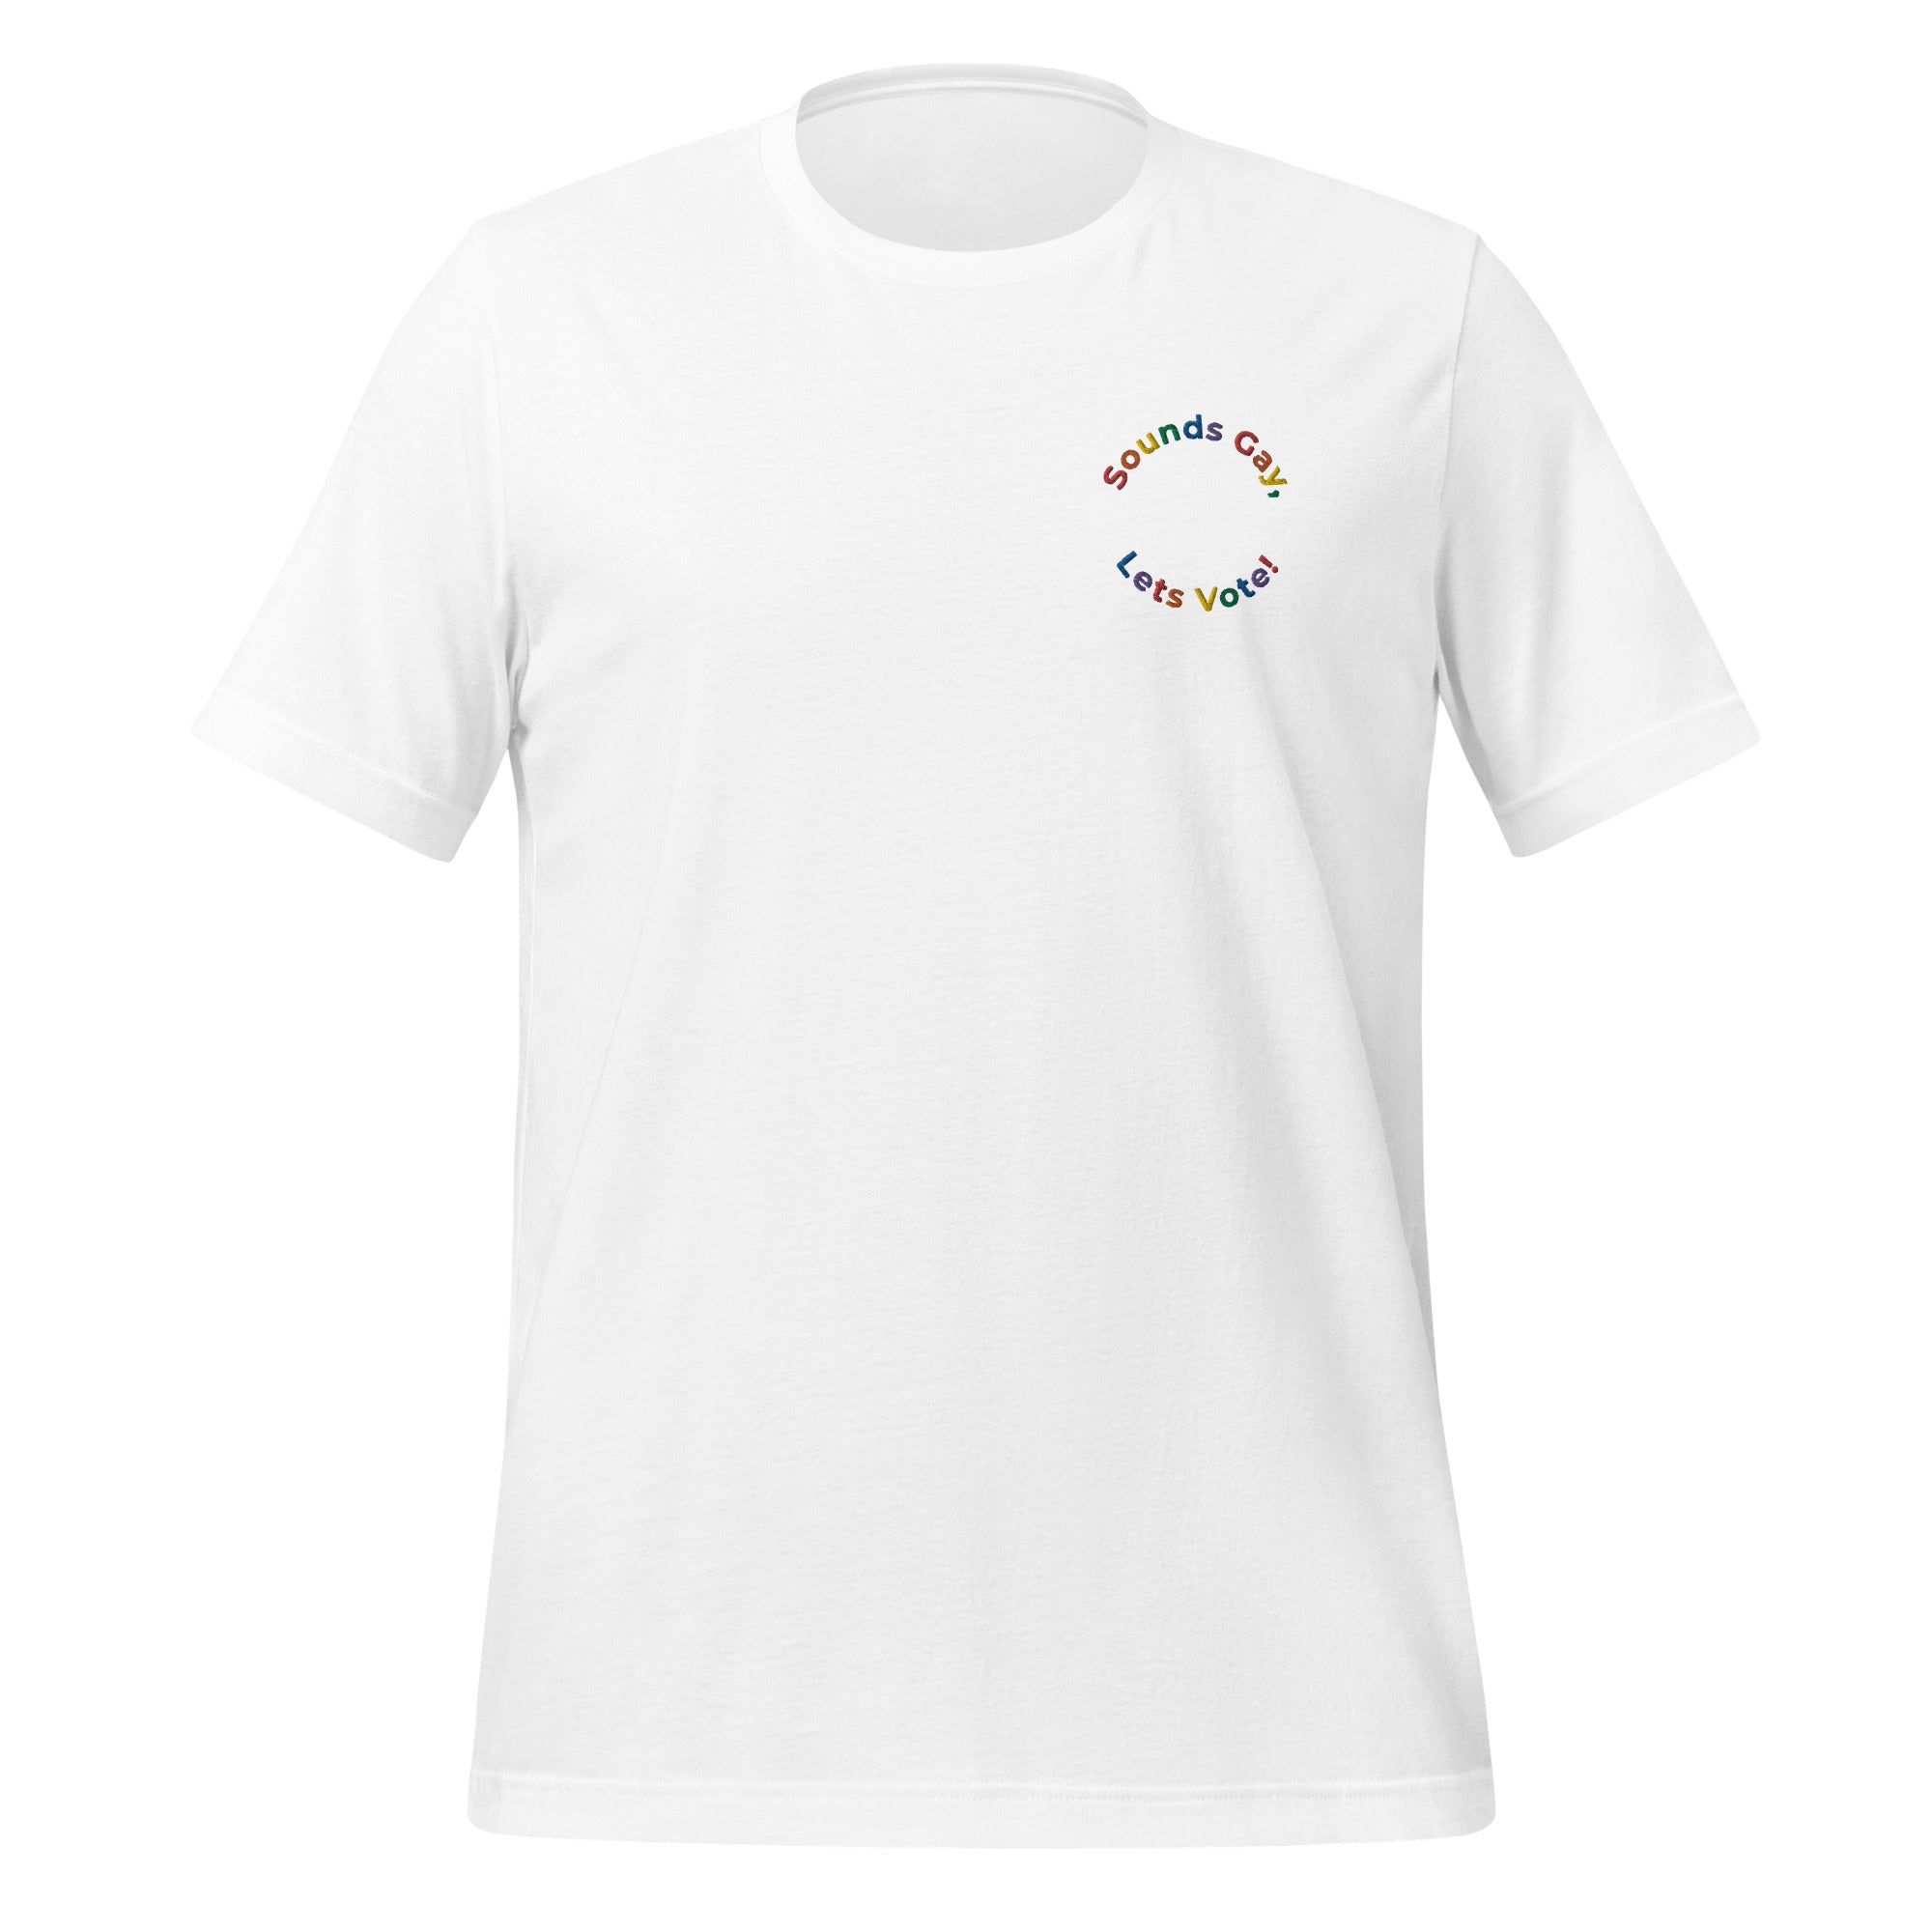 Sounds Gay, Let's Vote Embroidered Unisex T-Shirt